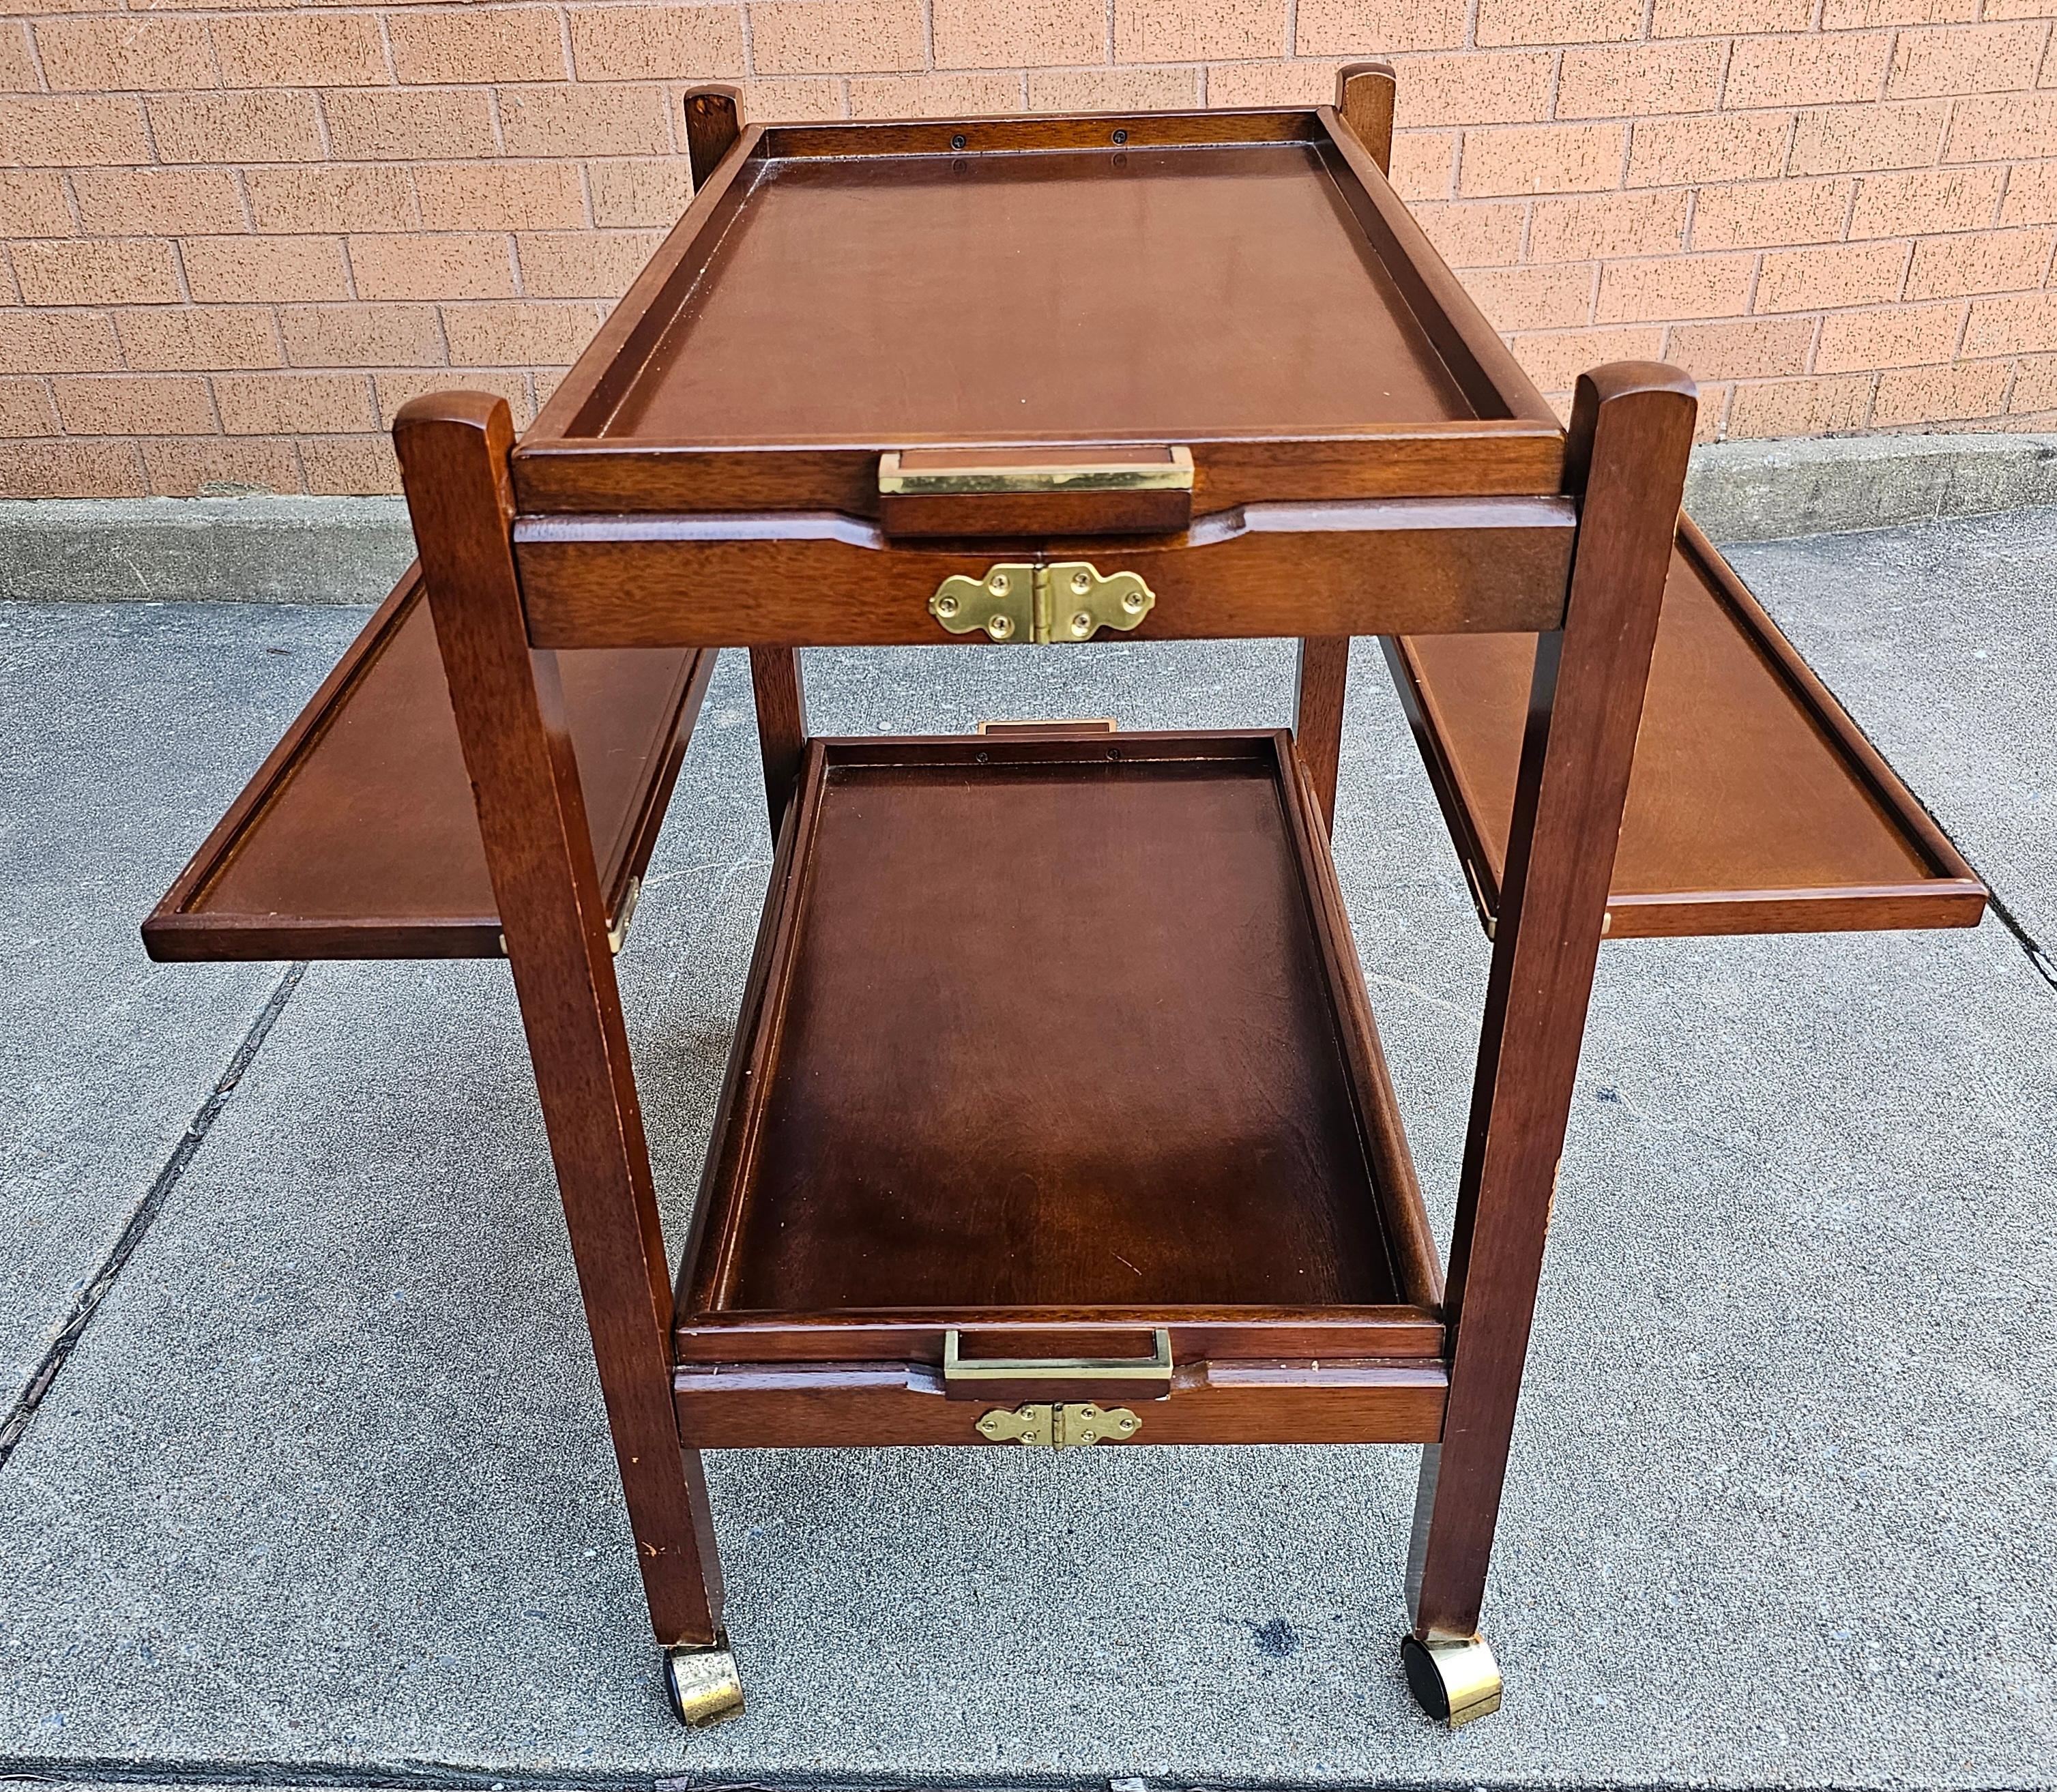 A Scandinavian Modern Style Two-Tier Fold-Up Rolling Bar Cart with two Removable Trays and two fold-up leaves.
Measures 31